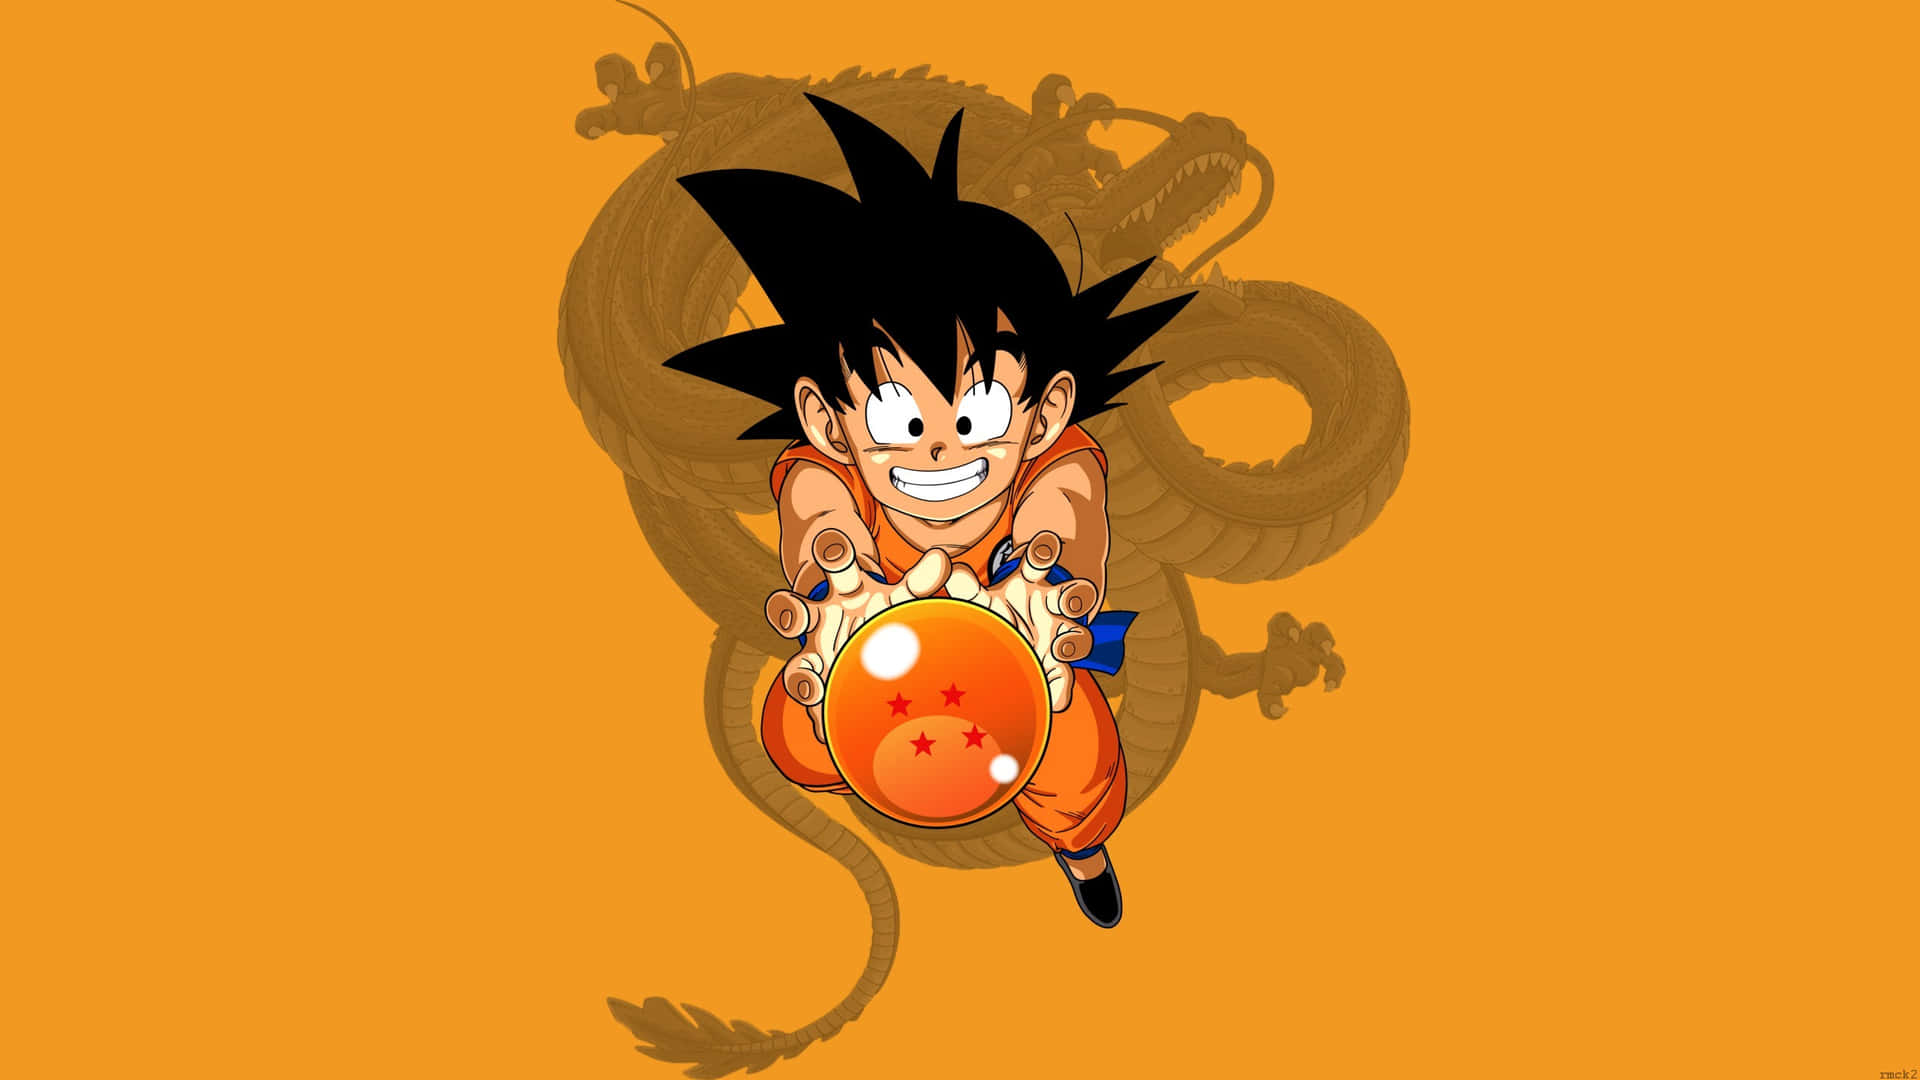 Keep Calm and Learn From Goku! Wallpaper